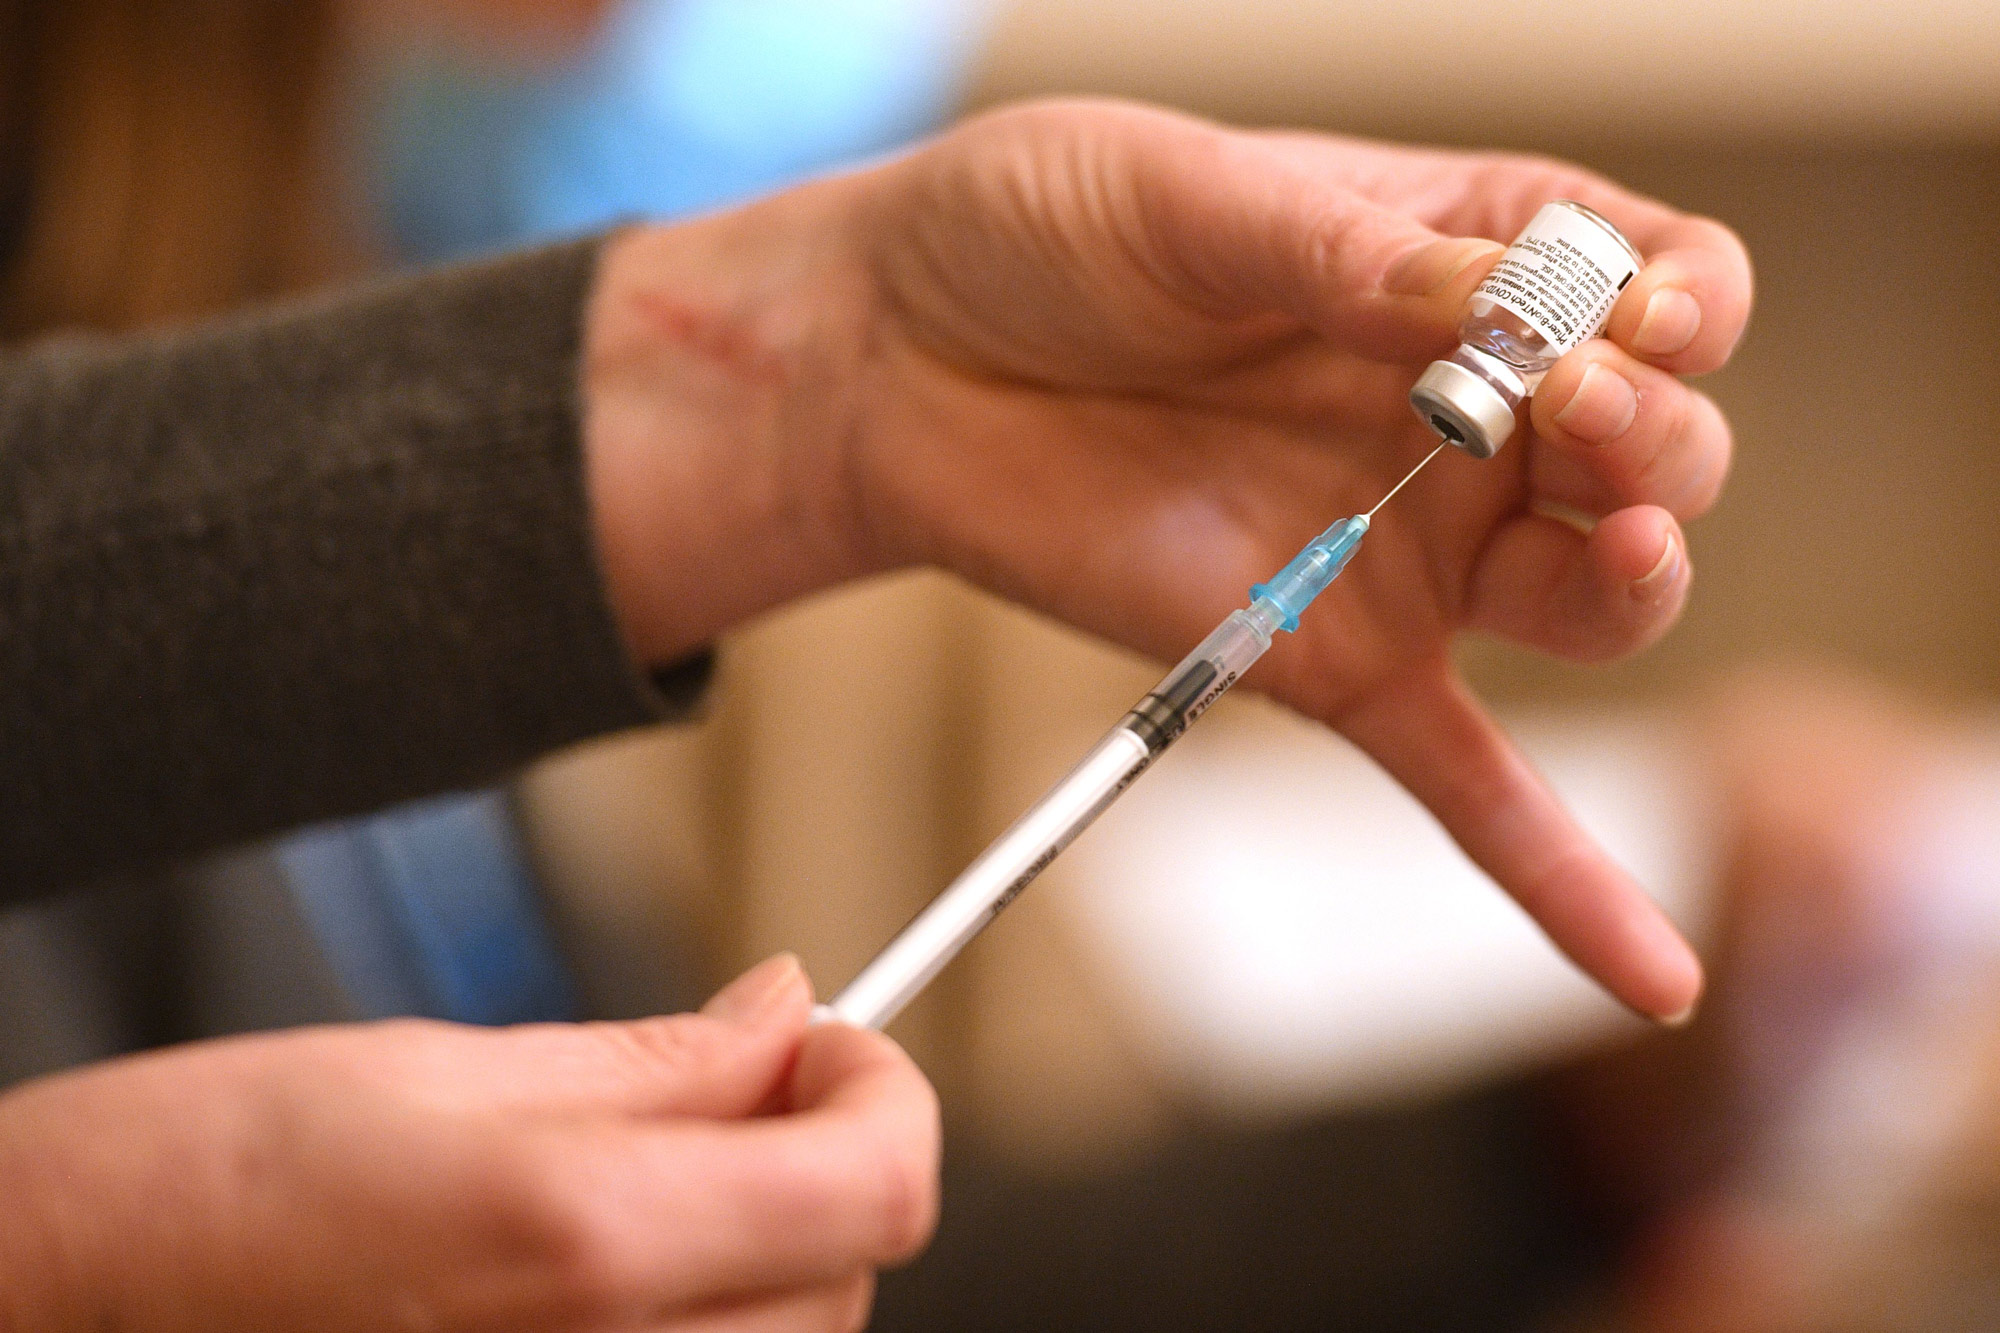 A healthcare professional draws up a dose of Pfizer/BioNTech Covid-19 vaccine at a vaccination center set up at Thornton Little Theatre in Thornton-Cleveleys, England, on January 29.